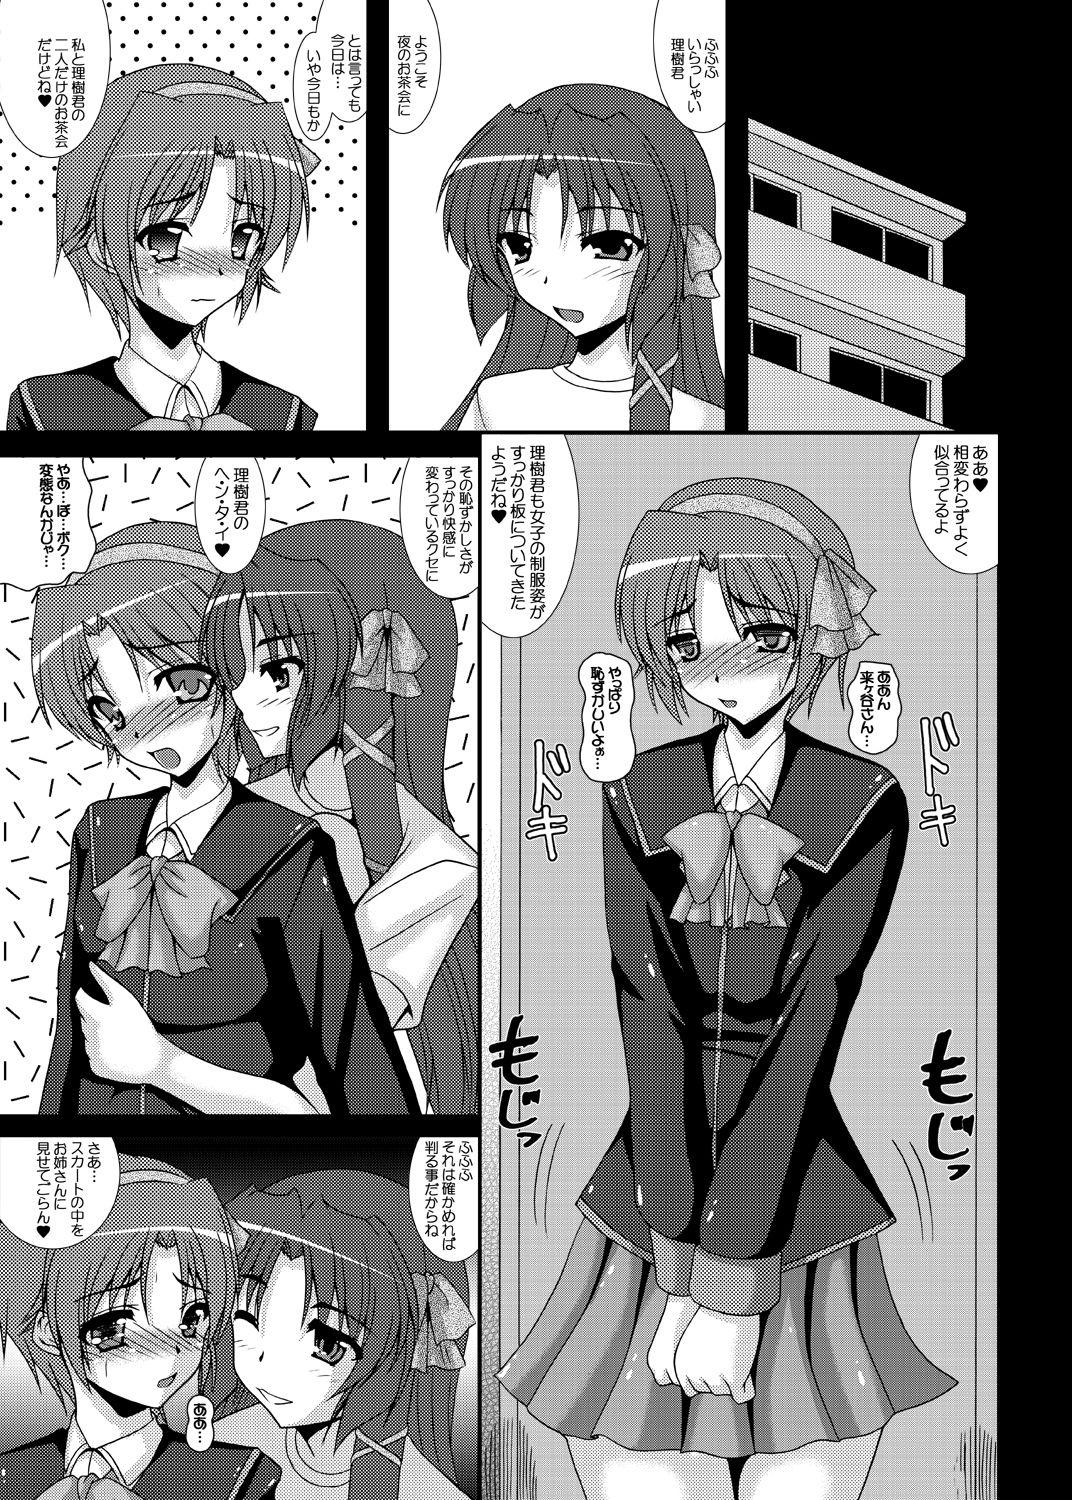 Tesao 理樹君で遊ぼうっ! - Little busters Blow Jobs Porn - Page 2